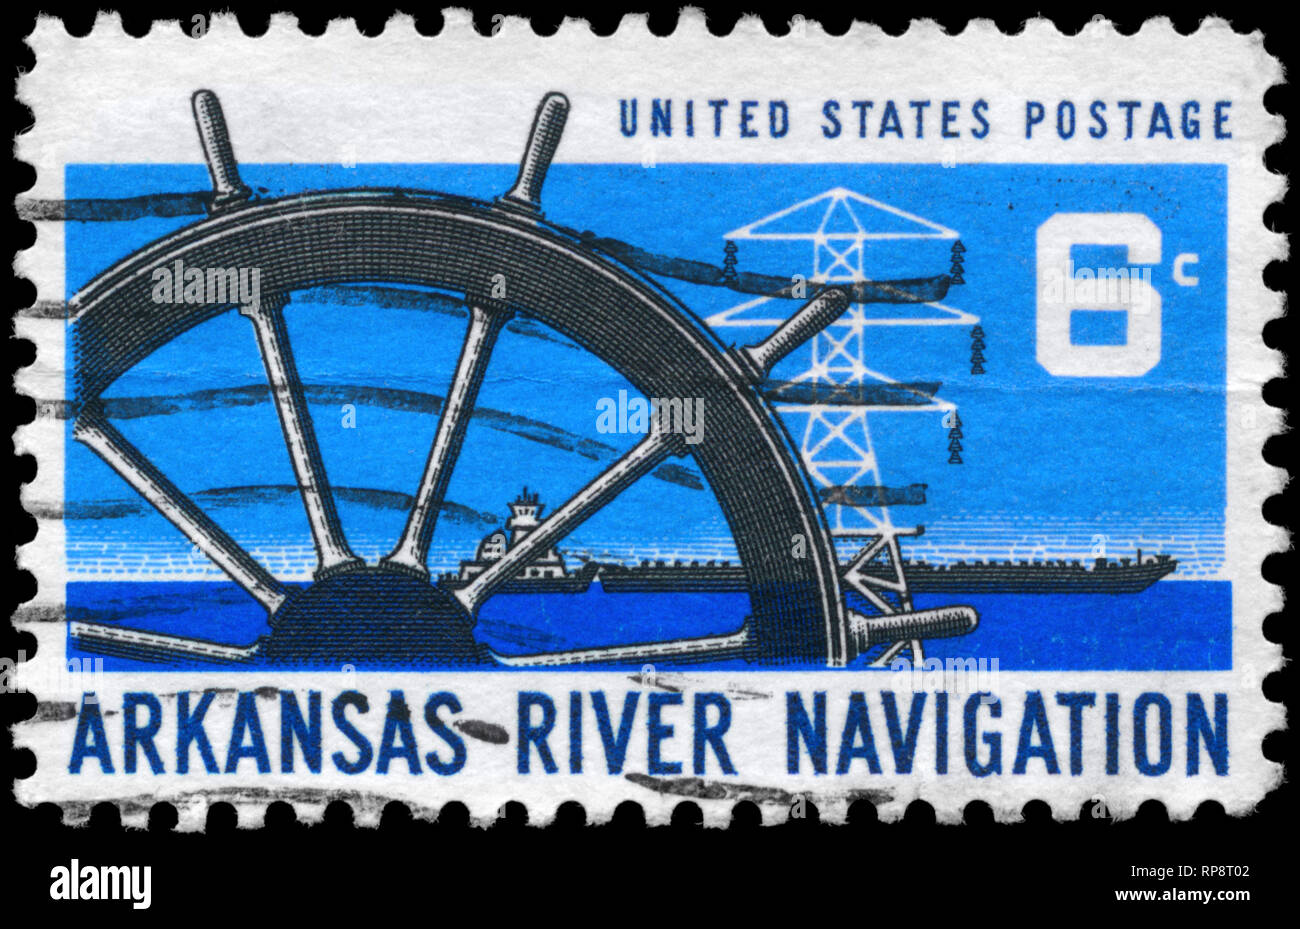 USA - CIRCA 1968: A Stamp printed in USA shows the Ship’s Wheel, Power Transmission Tower & Barge, Arkansas River Navigation Issue, circa 1968 Stock Photo